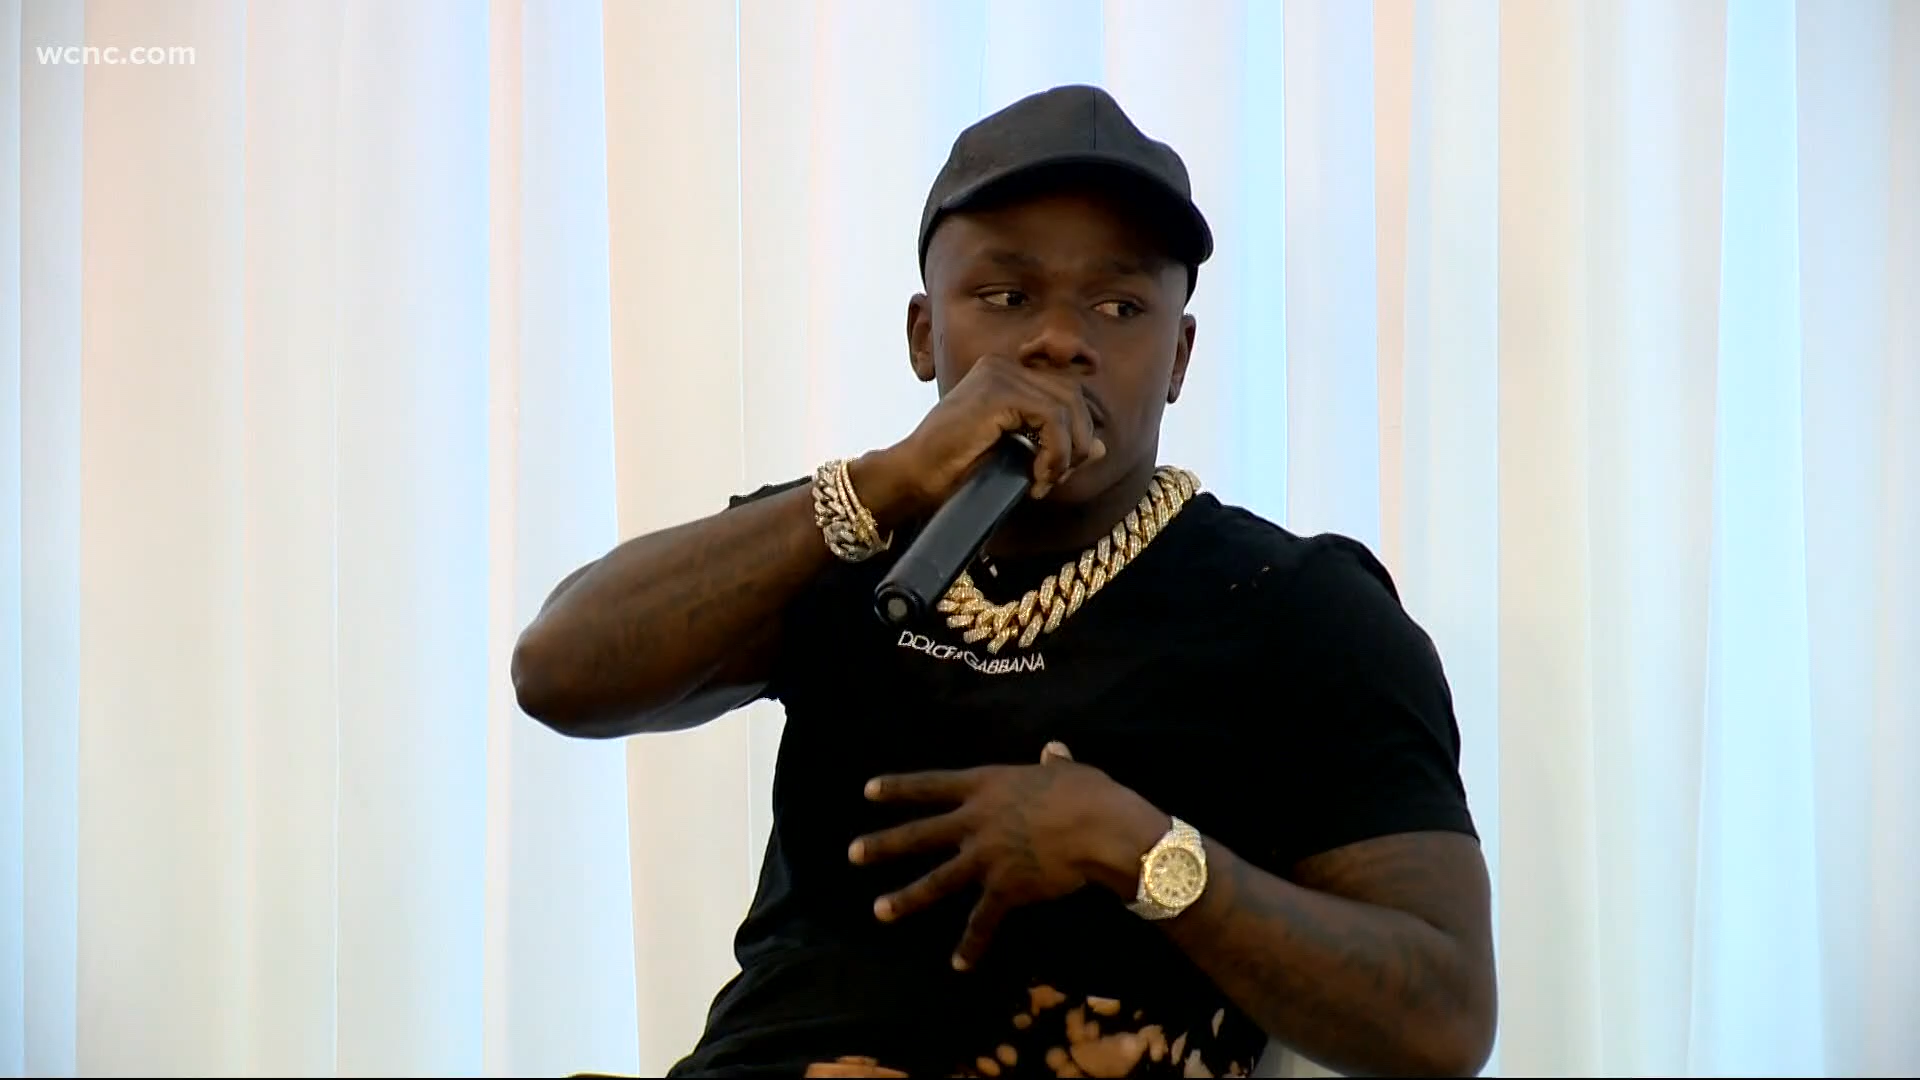 Charlotte native and rapper DaBaby hosted an event Friday to discuss police reform and systemic racism.